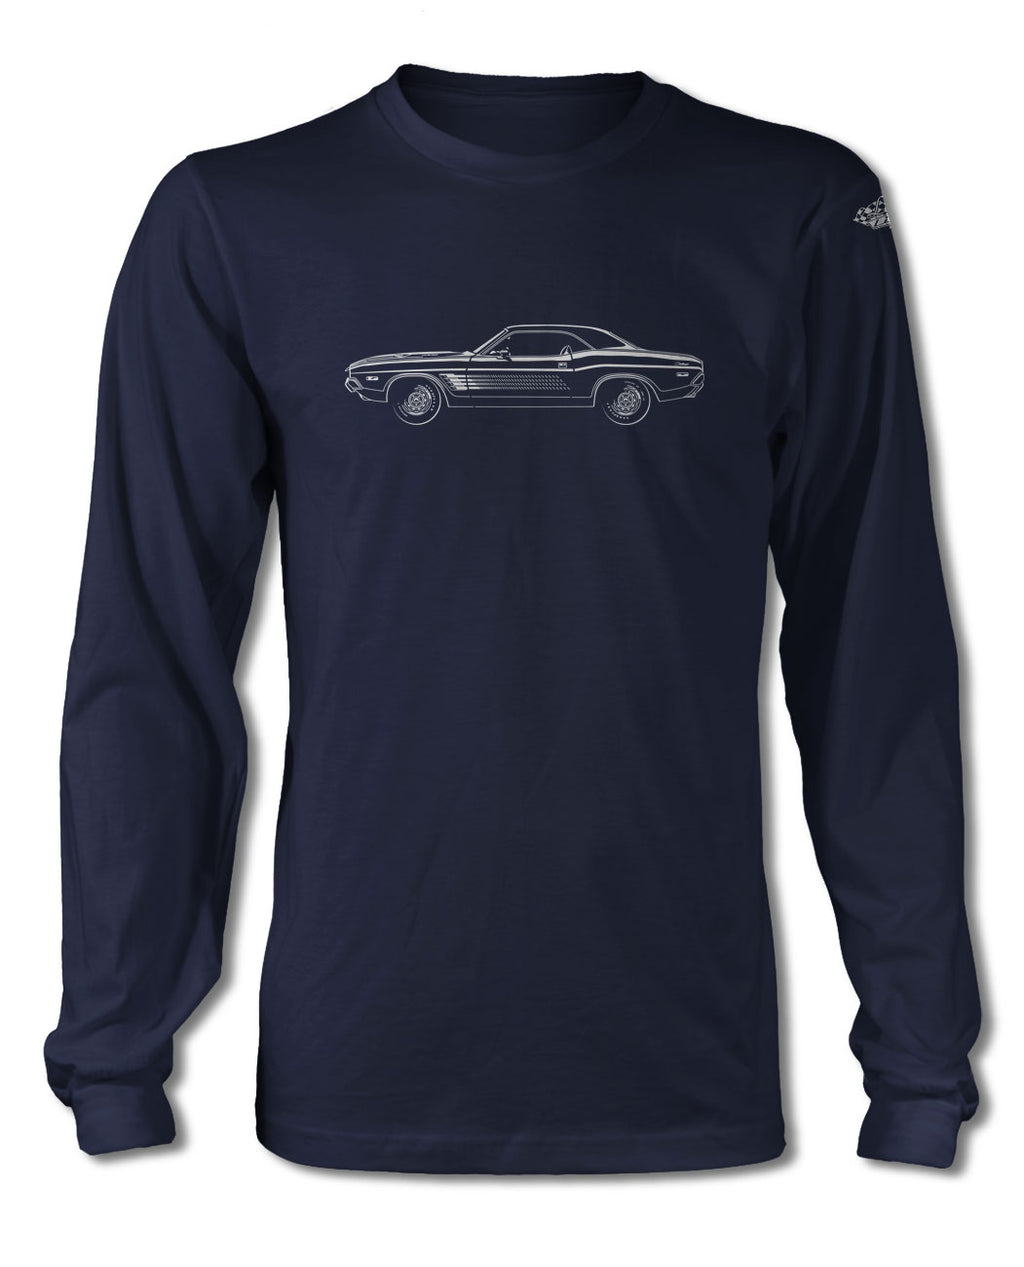 1972 Dodge Challenger Rallye with Stripes Coupe T-Shirt - Long Sleeves - Side View